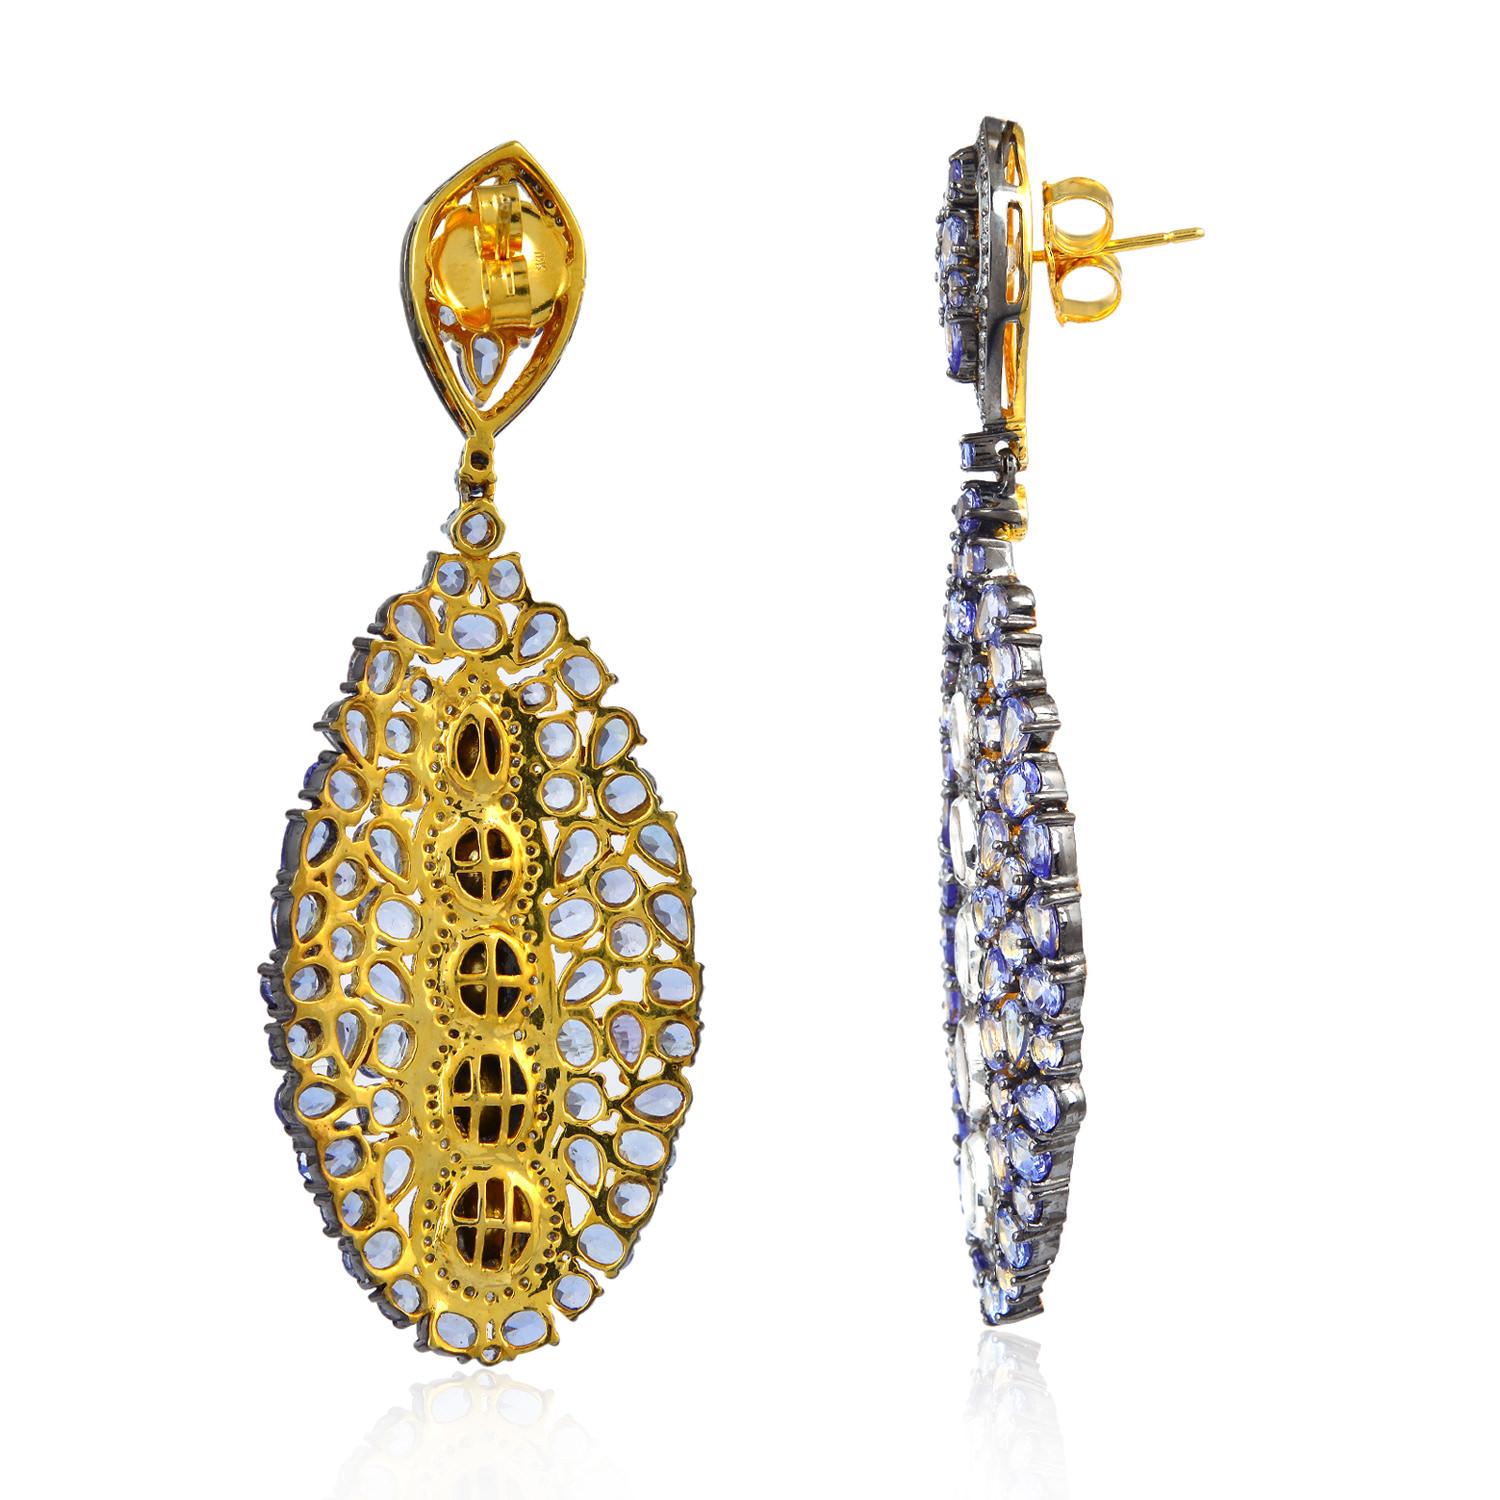 These stunning earrings are handmade in 18-karat gold and sterling silver.  
It is set with 16.91 carats tanzanite and 3.14 carats diamonds in blackened finish. 

FOLLOW  MEGHNA JEWELS storefront to view the latest collection & exclusive pieces. 